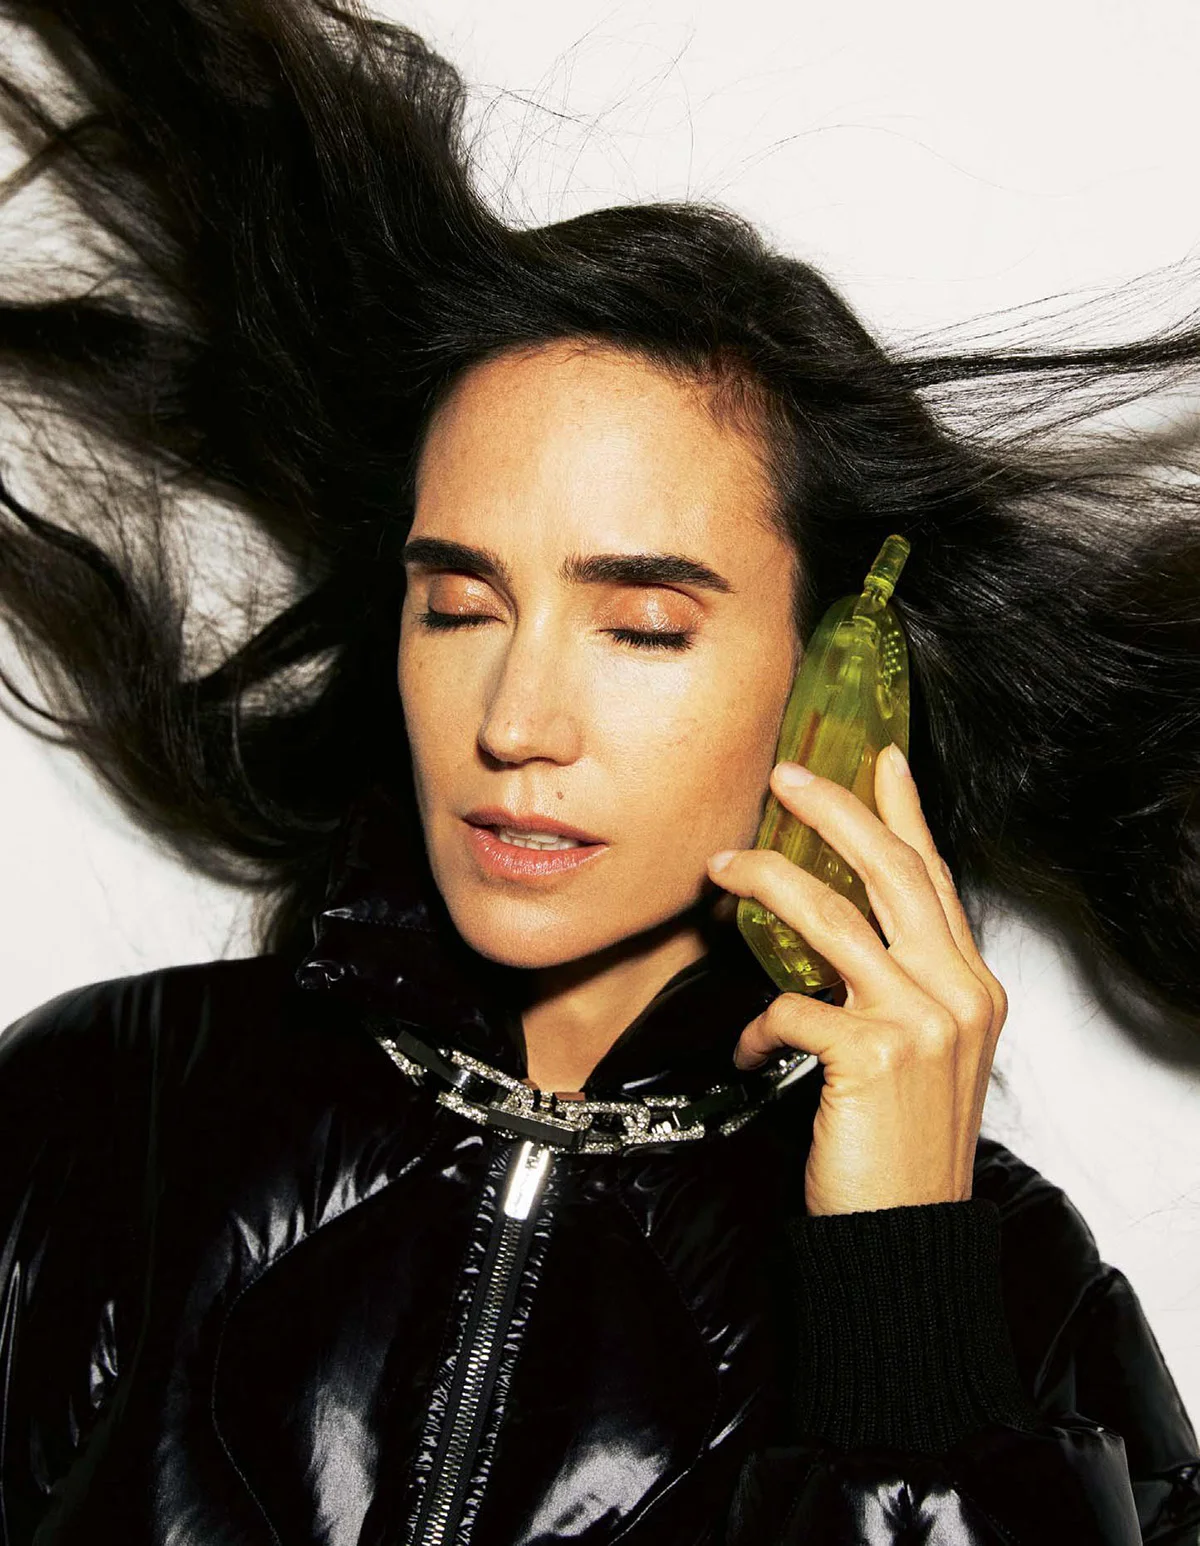 Jennifer Connelly covers The Sunday Times Style May 29th, 2022 by Carin Backoff